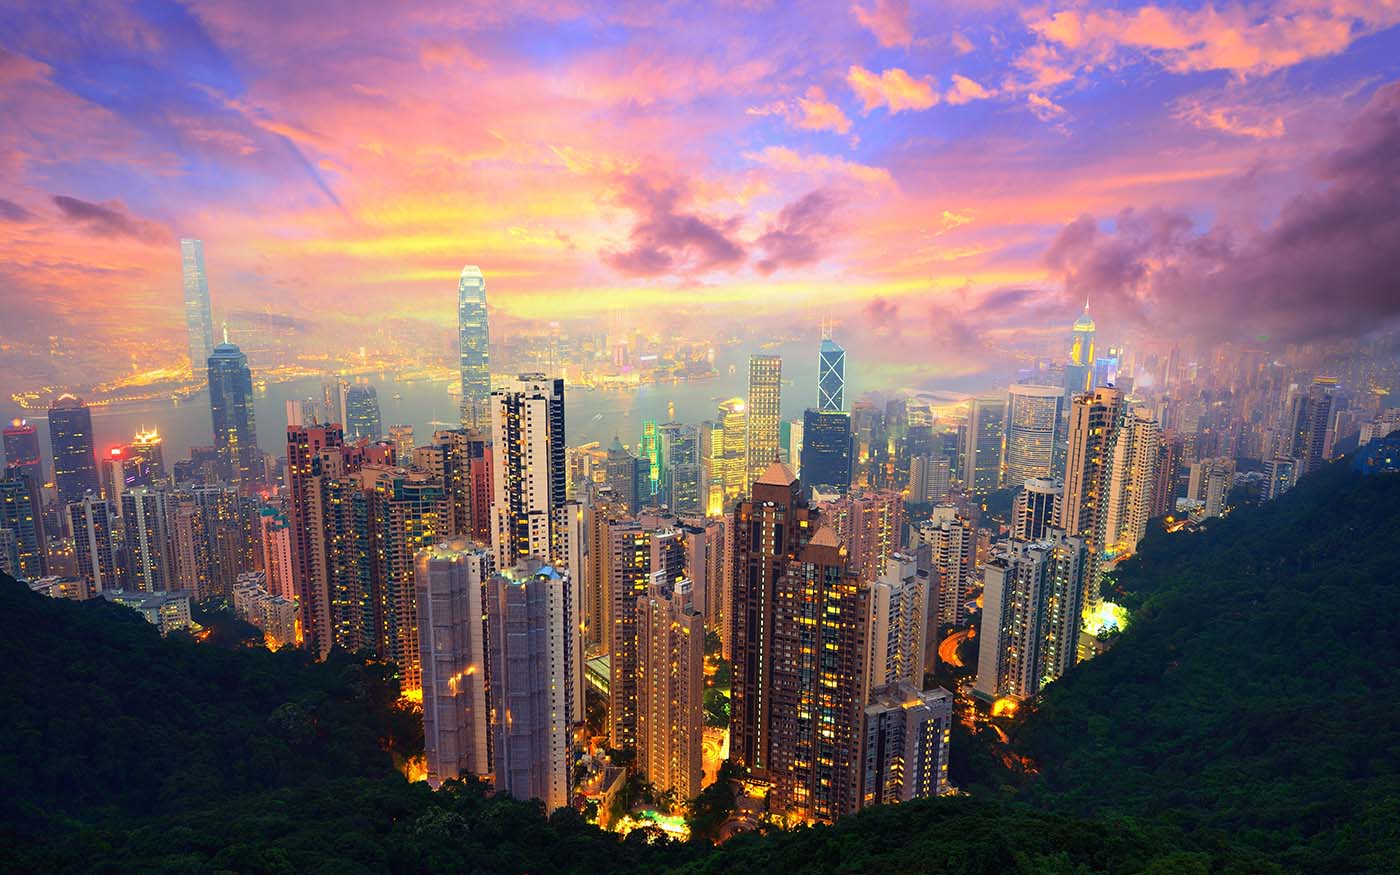 Panoramic aerila view of the iconic skyscrapers dominating the skyline of Hong Kong, showcasing the vibrant urban landscape - Hong Kong & Bali: A Luxury Odyssey from Skylines to Shorelines - Sisterhood Travels